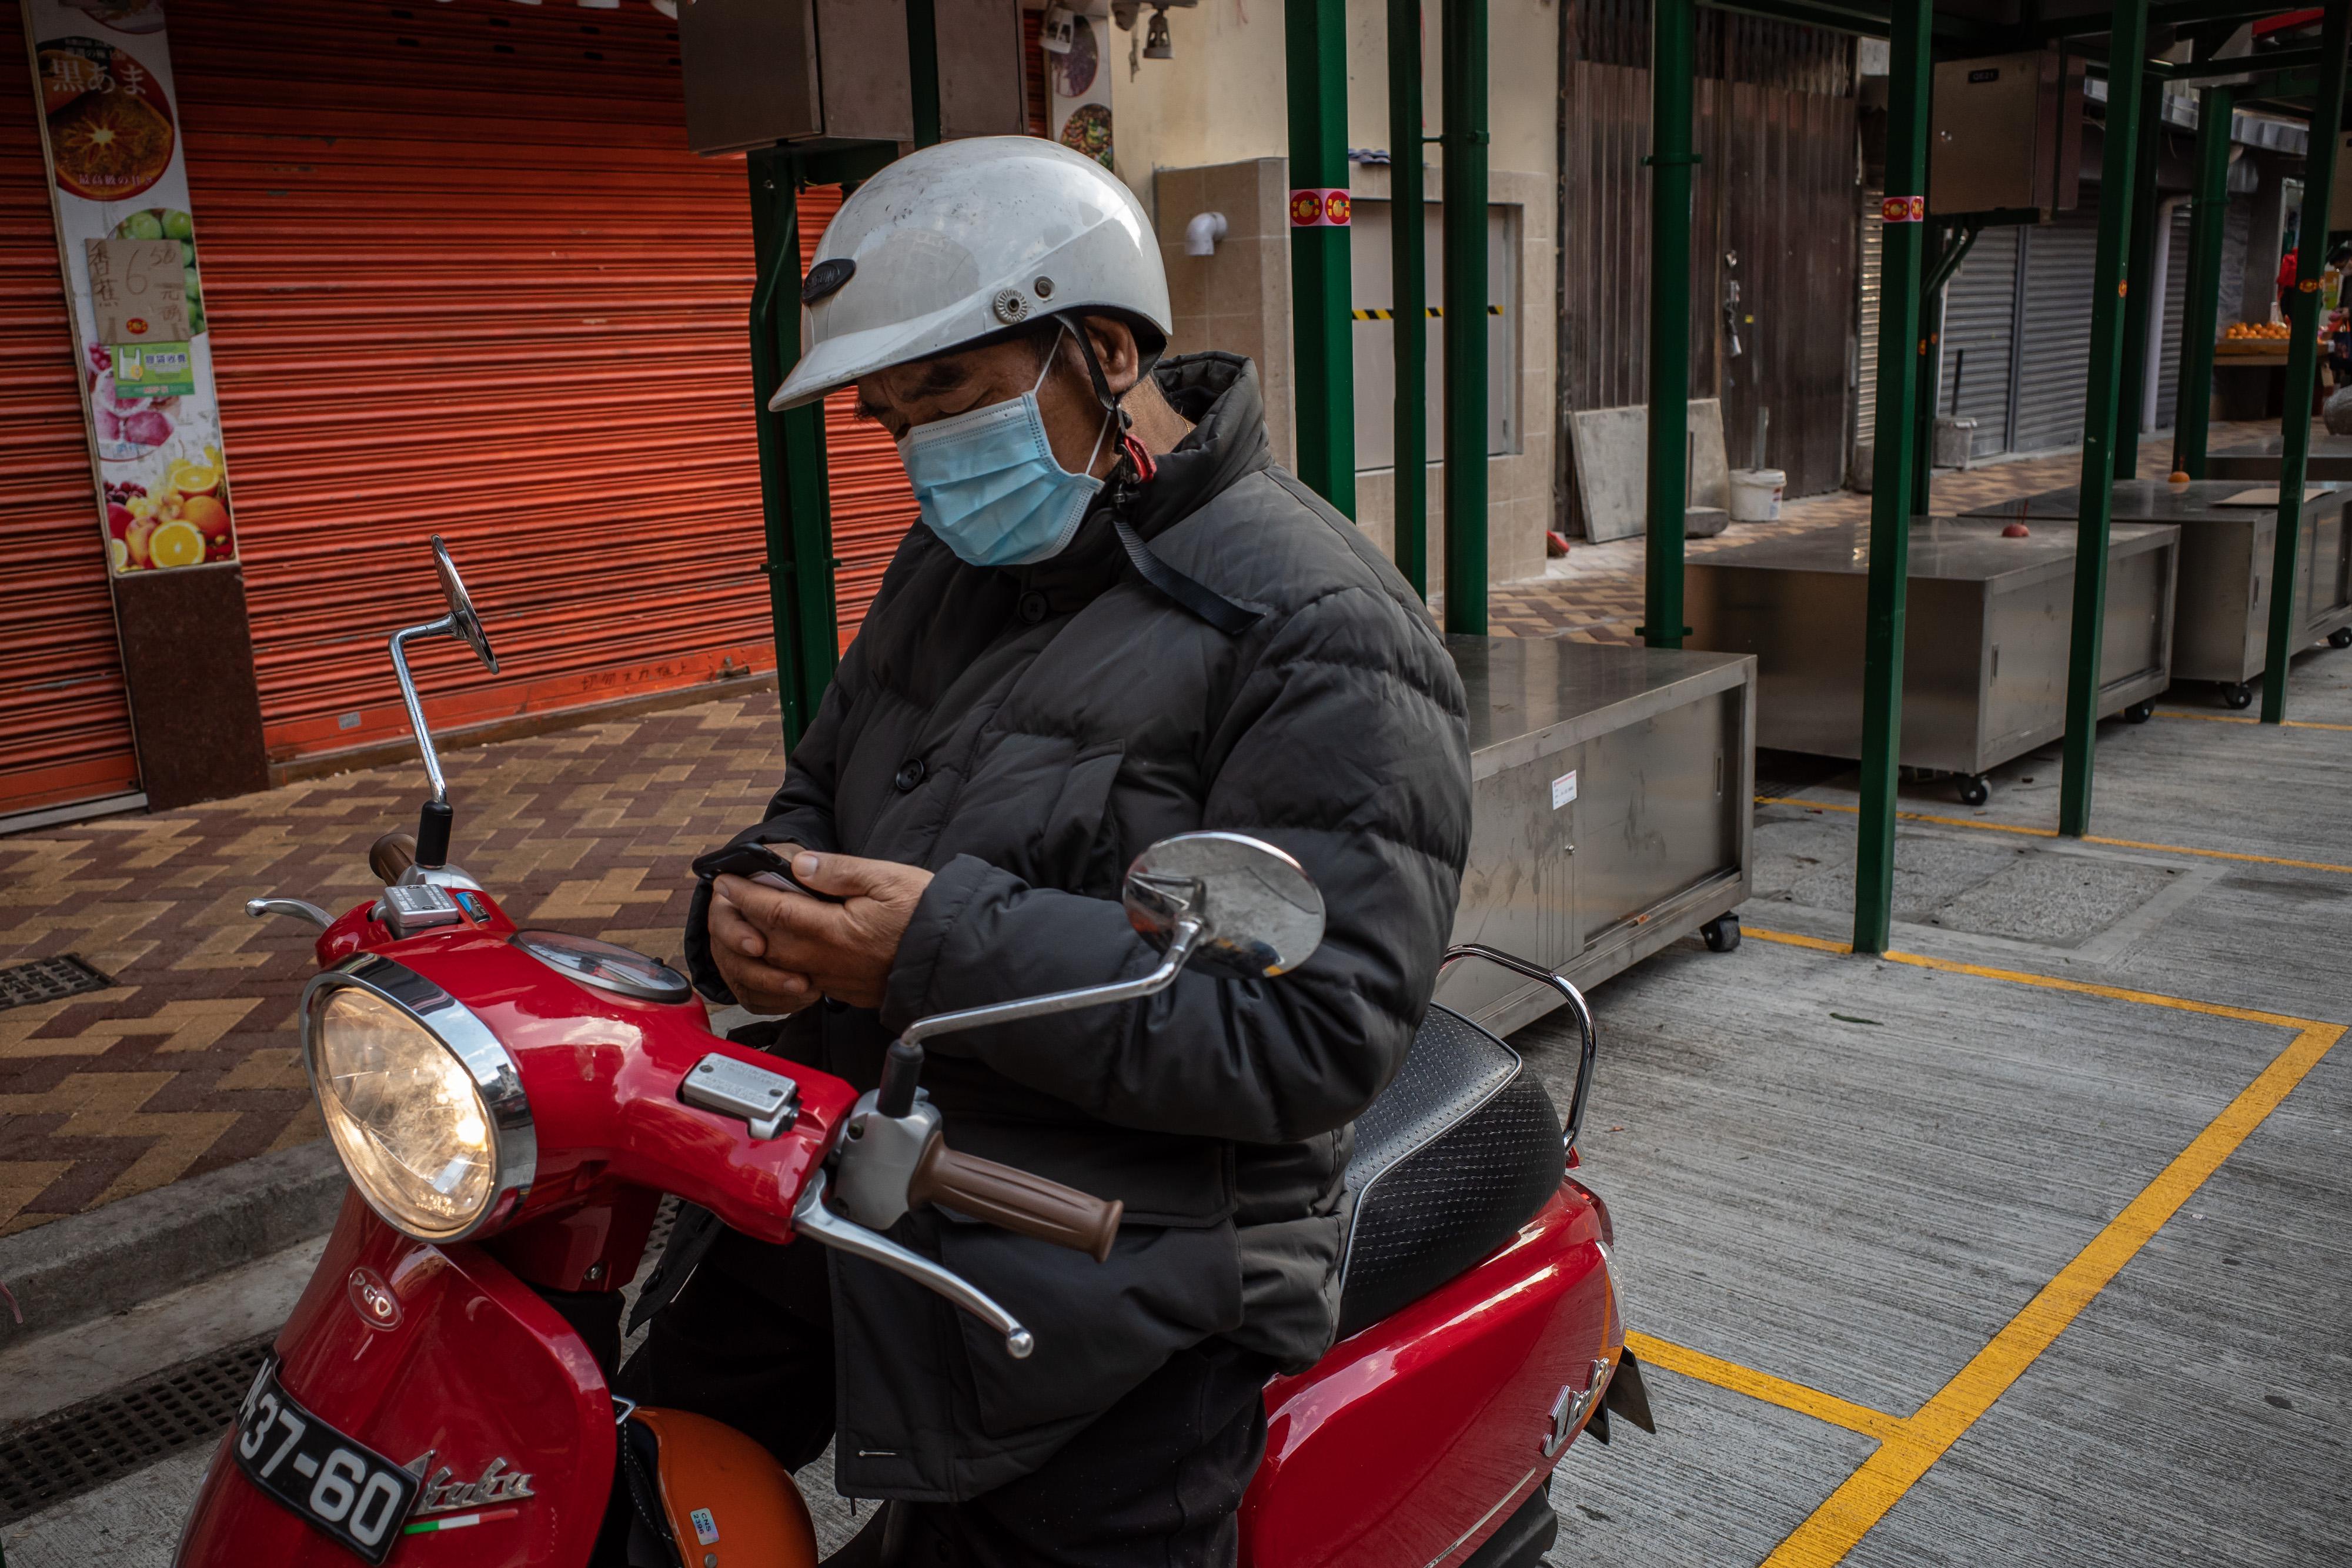 A motorcyclist wearing a face mask looks at his phone while sitting on his bike.